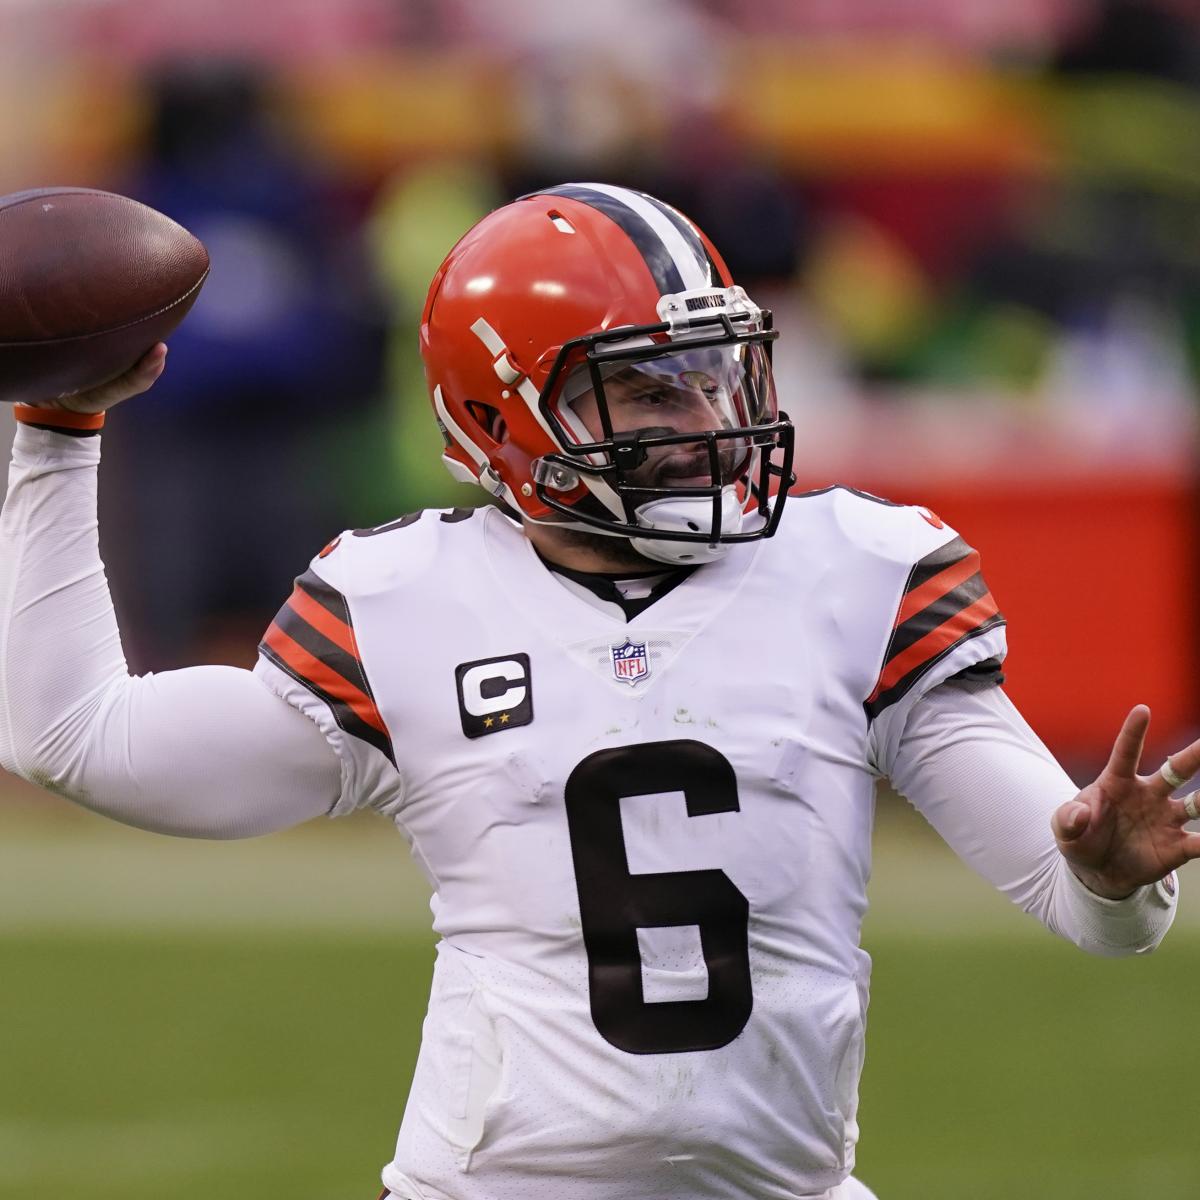 2021 Cleveland Browns Schedule: Full Listing of Dates, Times and TV